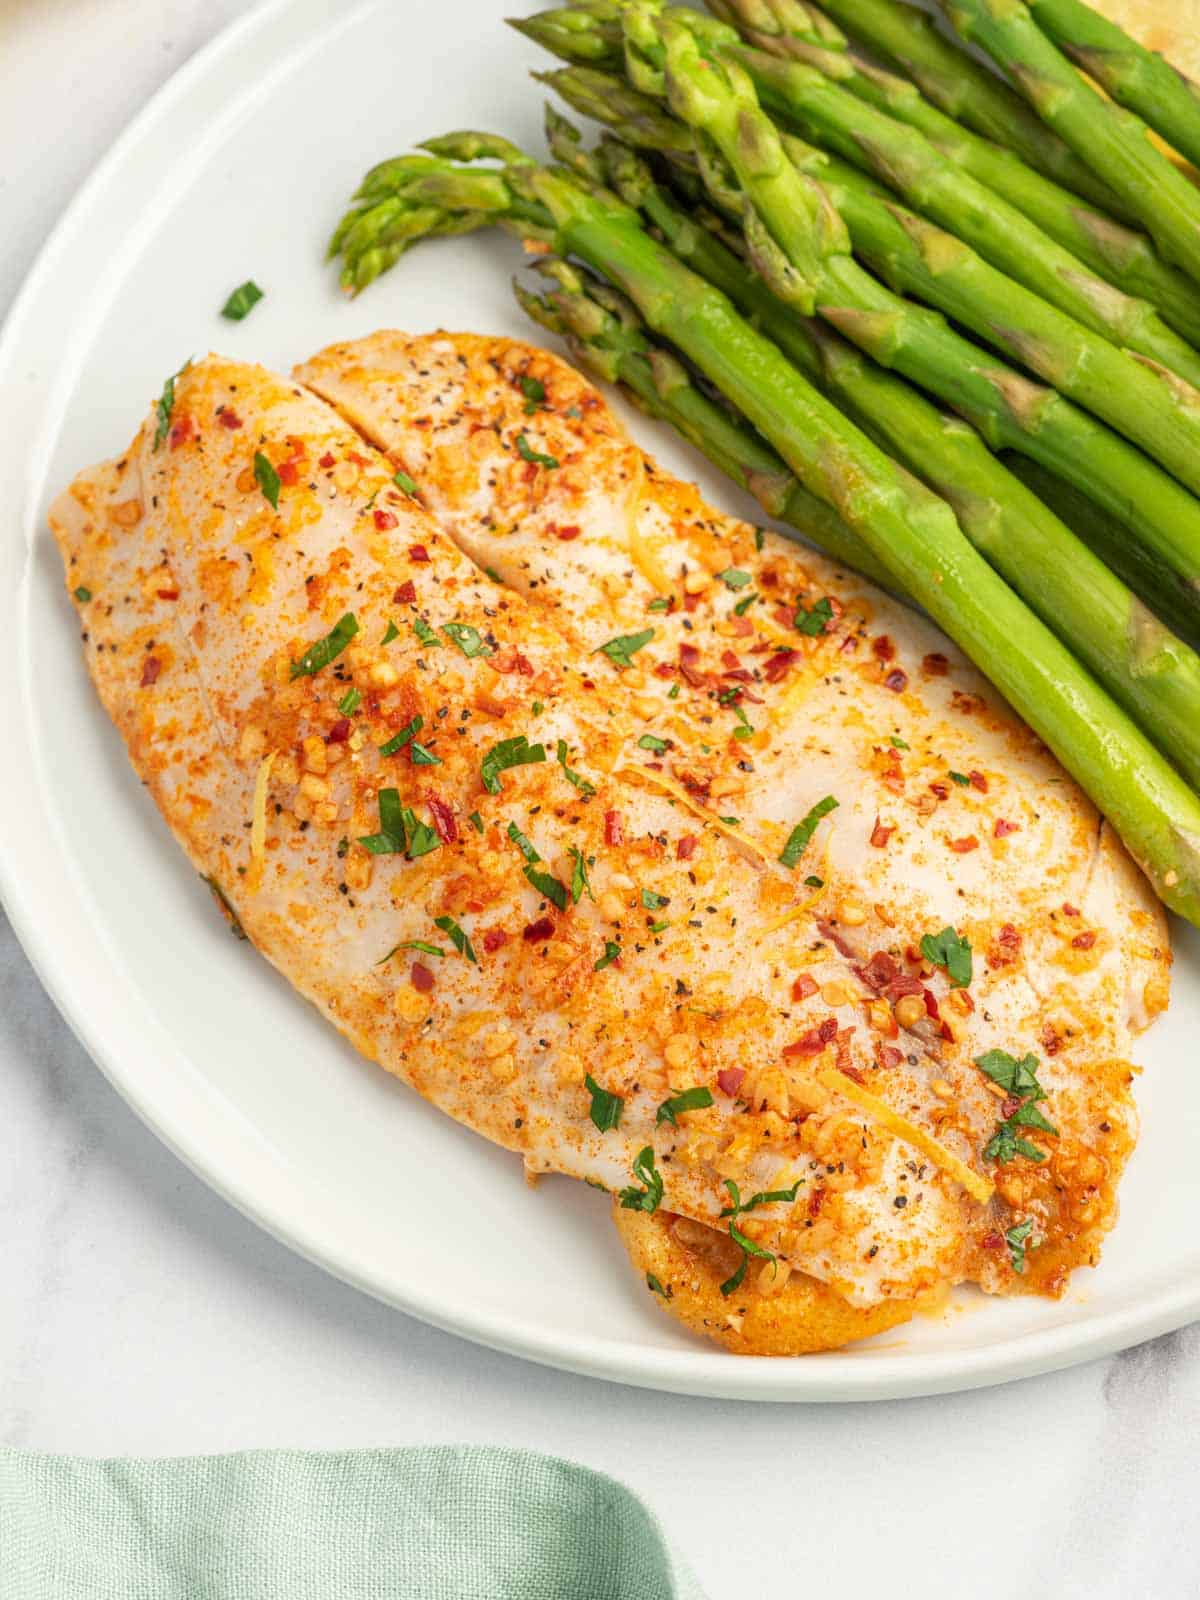 Easy baked tilapia recipe on a plate with asparagus.